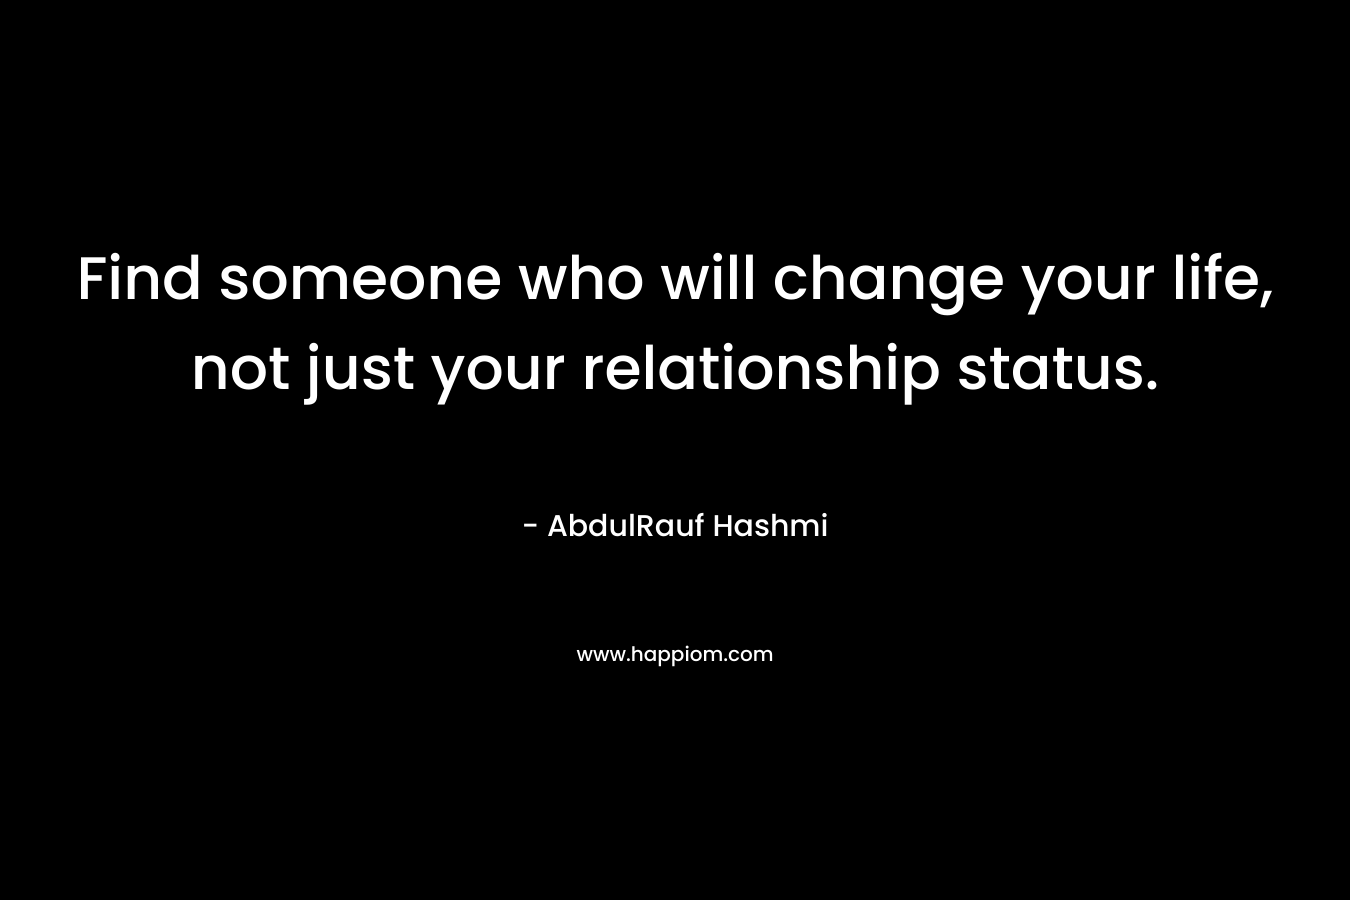 Find someone who will change your life, not just your relationship status. – AbdulRauf Hashmi